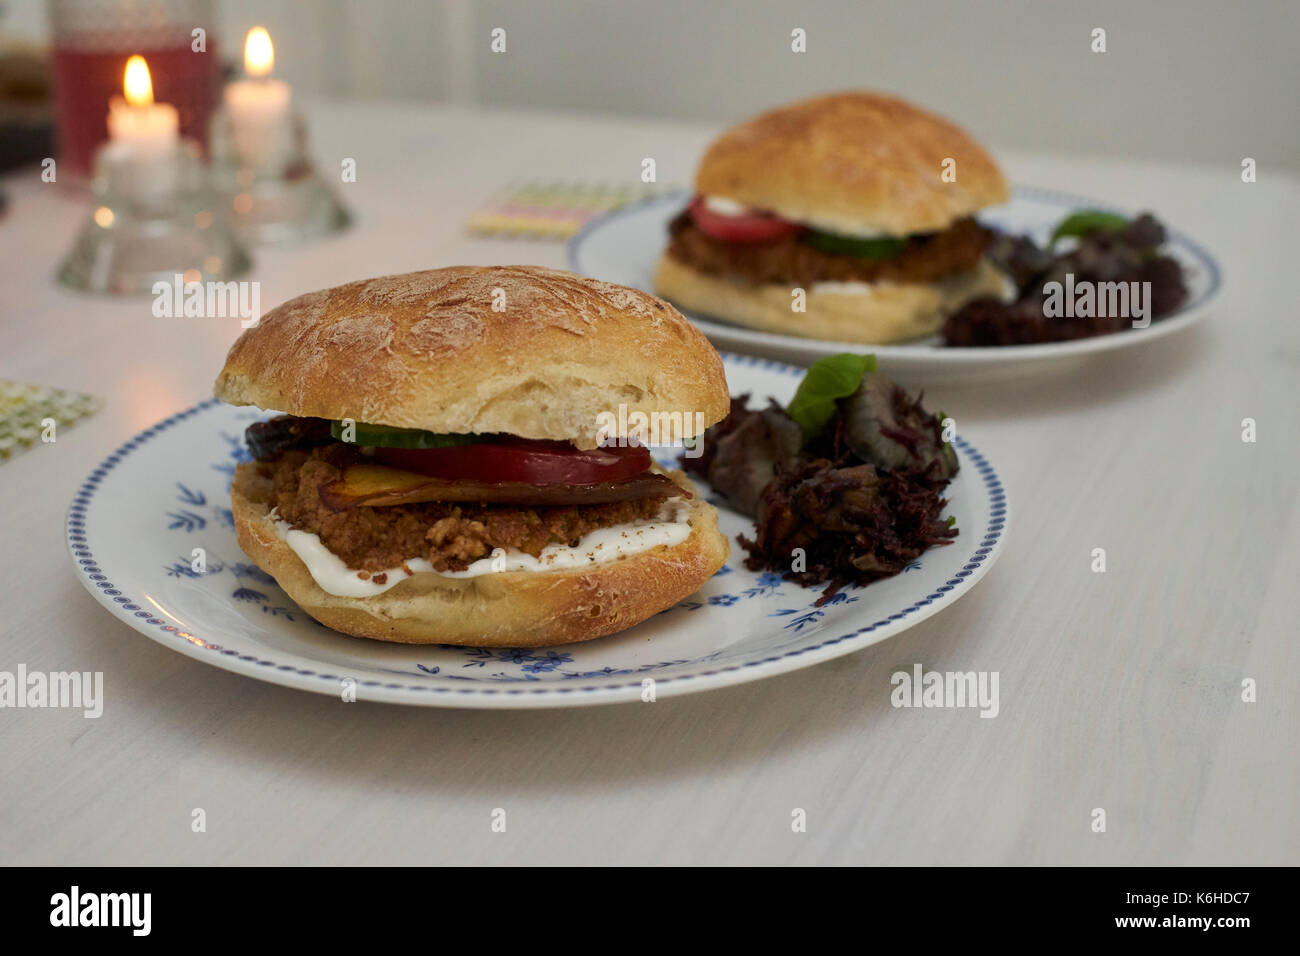 Two vegan burgers on plates and two candles in the background Stock Photo